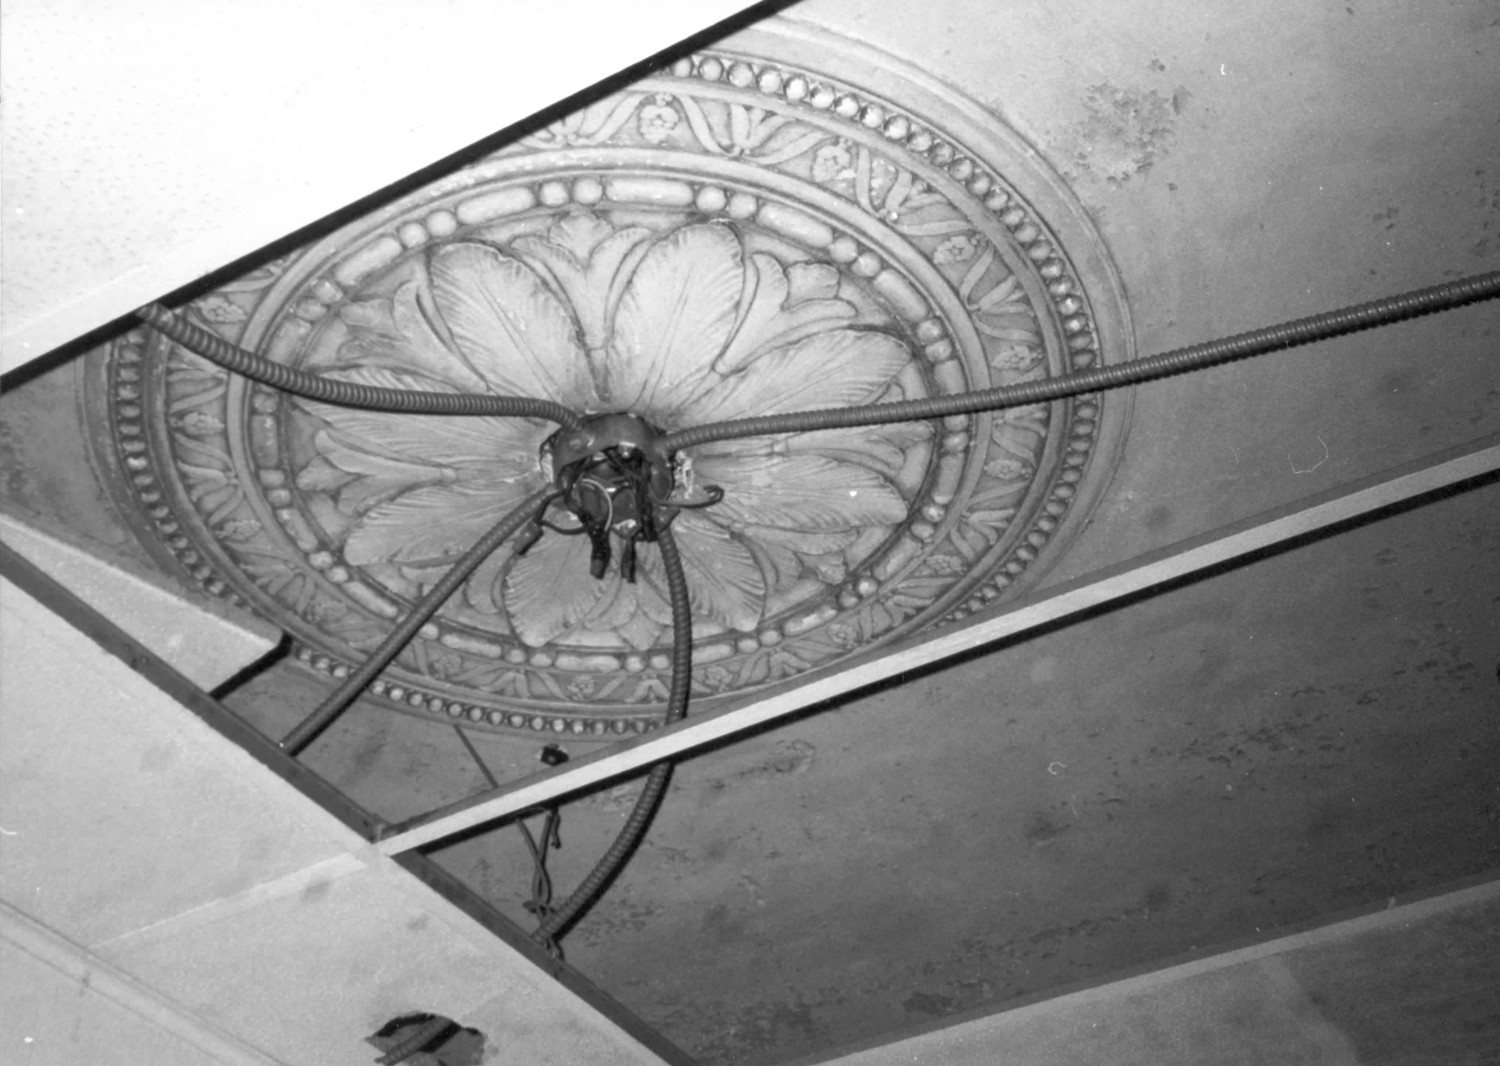 Lucas County Hospital and Nurse's Home, Toledo Ohio Hospital, ceiling medallion found in lobby and board room (1997)